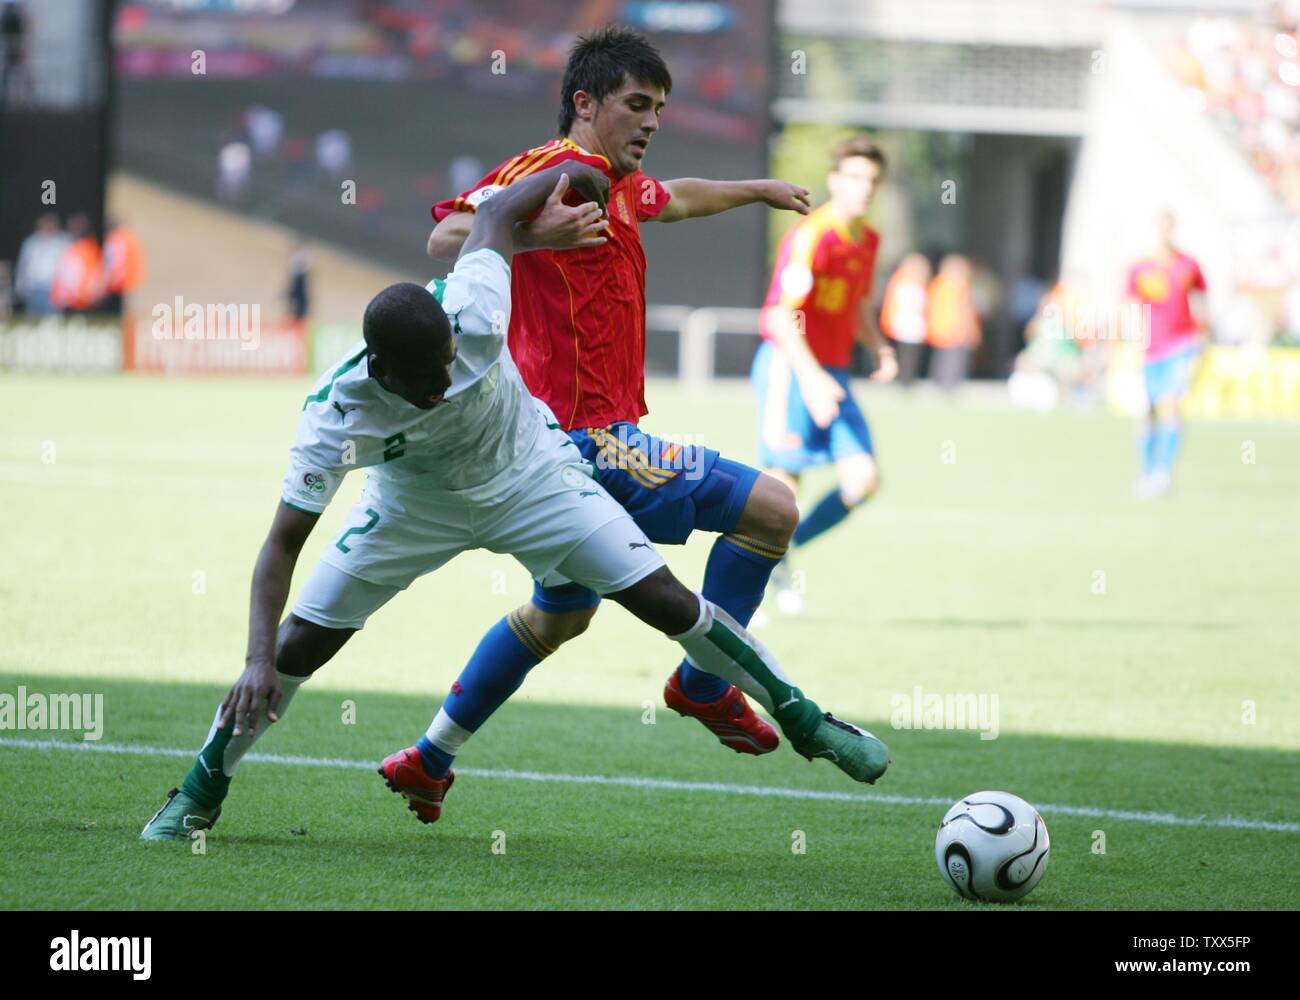 Spain's David Villa and Saudi Arabia's Ahmed Dokhi during the final Group H match of the FIFA World Cup Germany 2006 in Kaiserslautern, Germany on June 23, 2006. Spain advanced to the round of 16 as they beat Saudi Arabia 1-0. Juanito's goal off his head in the 36th-minute  confirmed the Saudi elimination after one draw and two defeats. (UPI  Photo/Christian Brunskill) Stock Photo